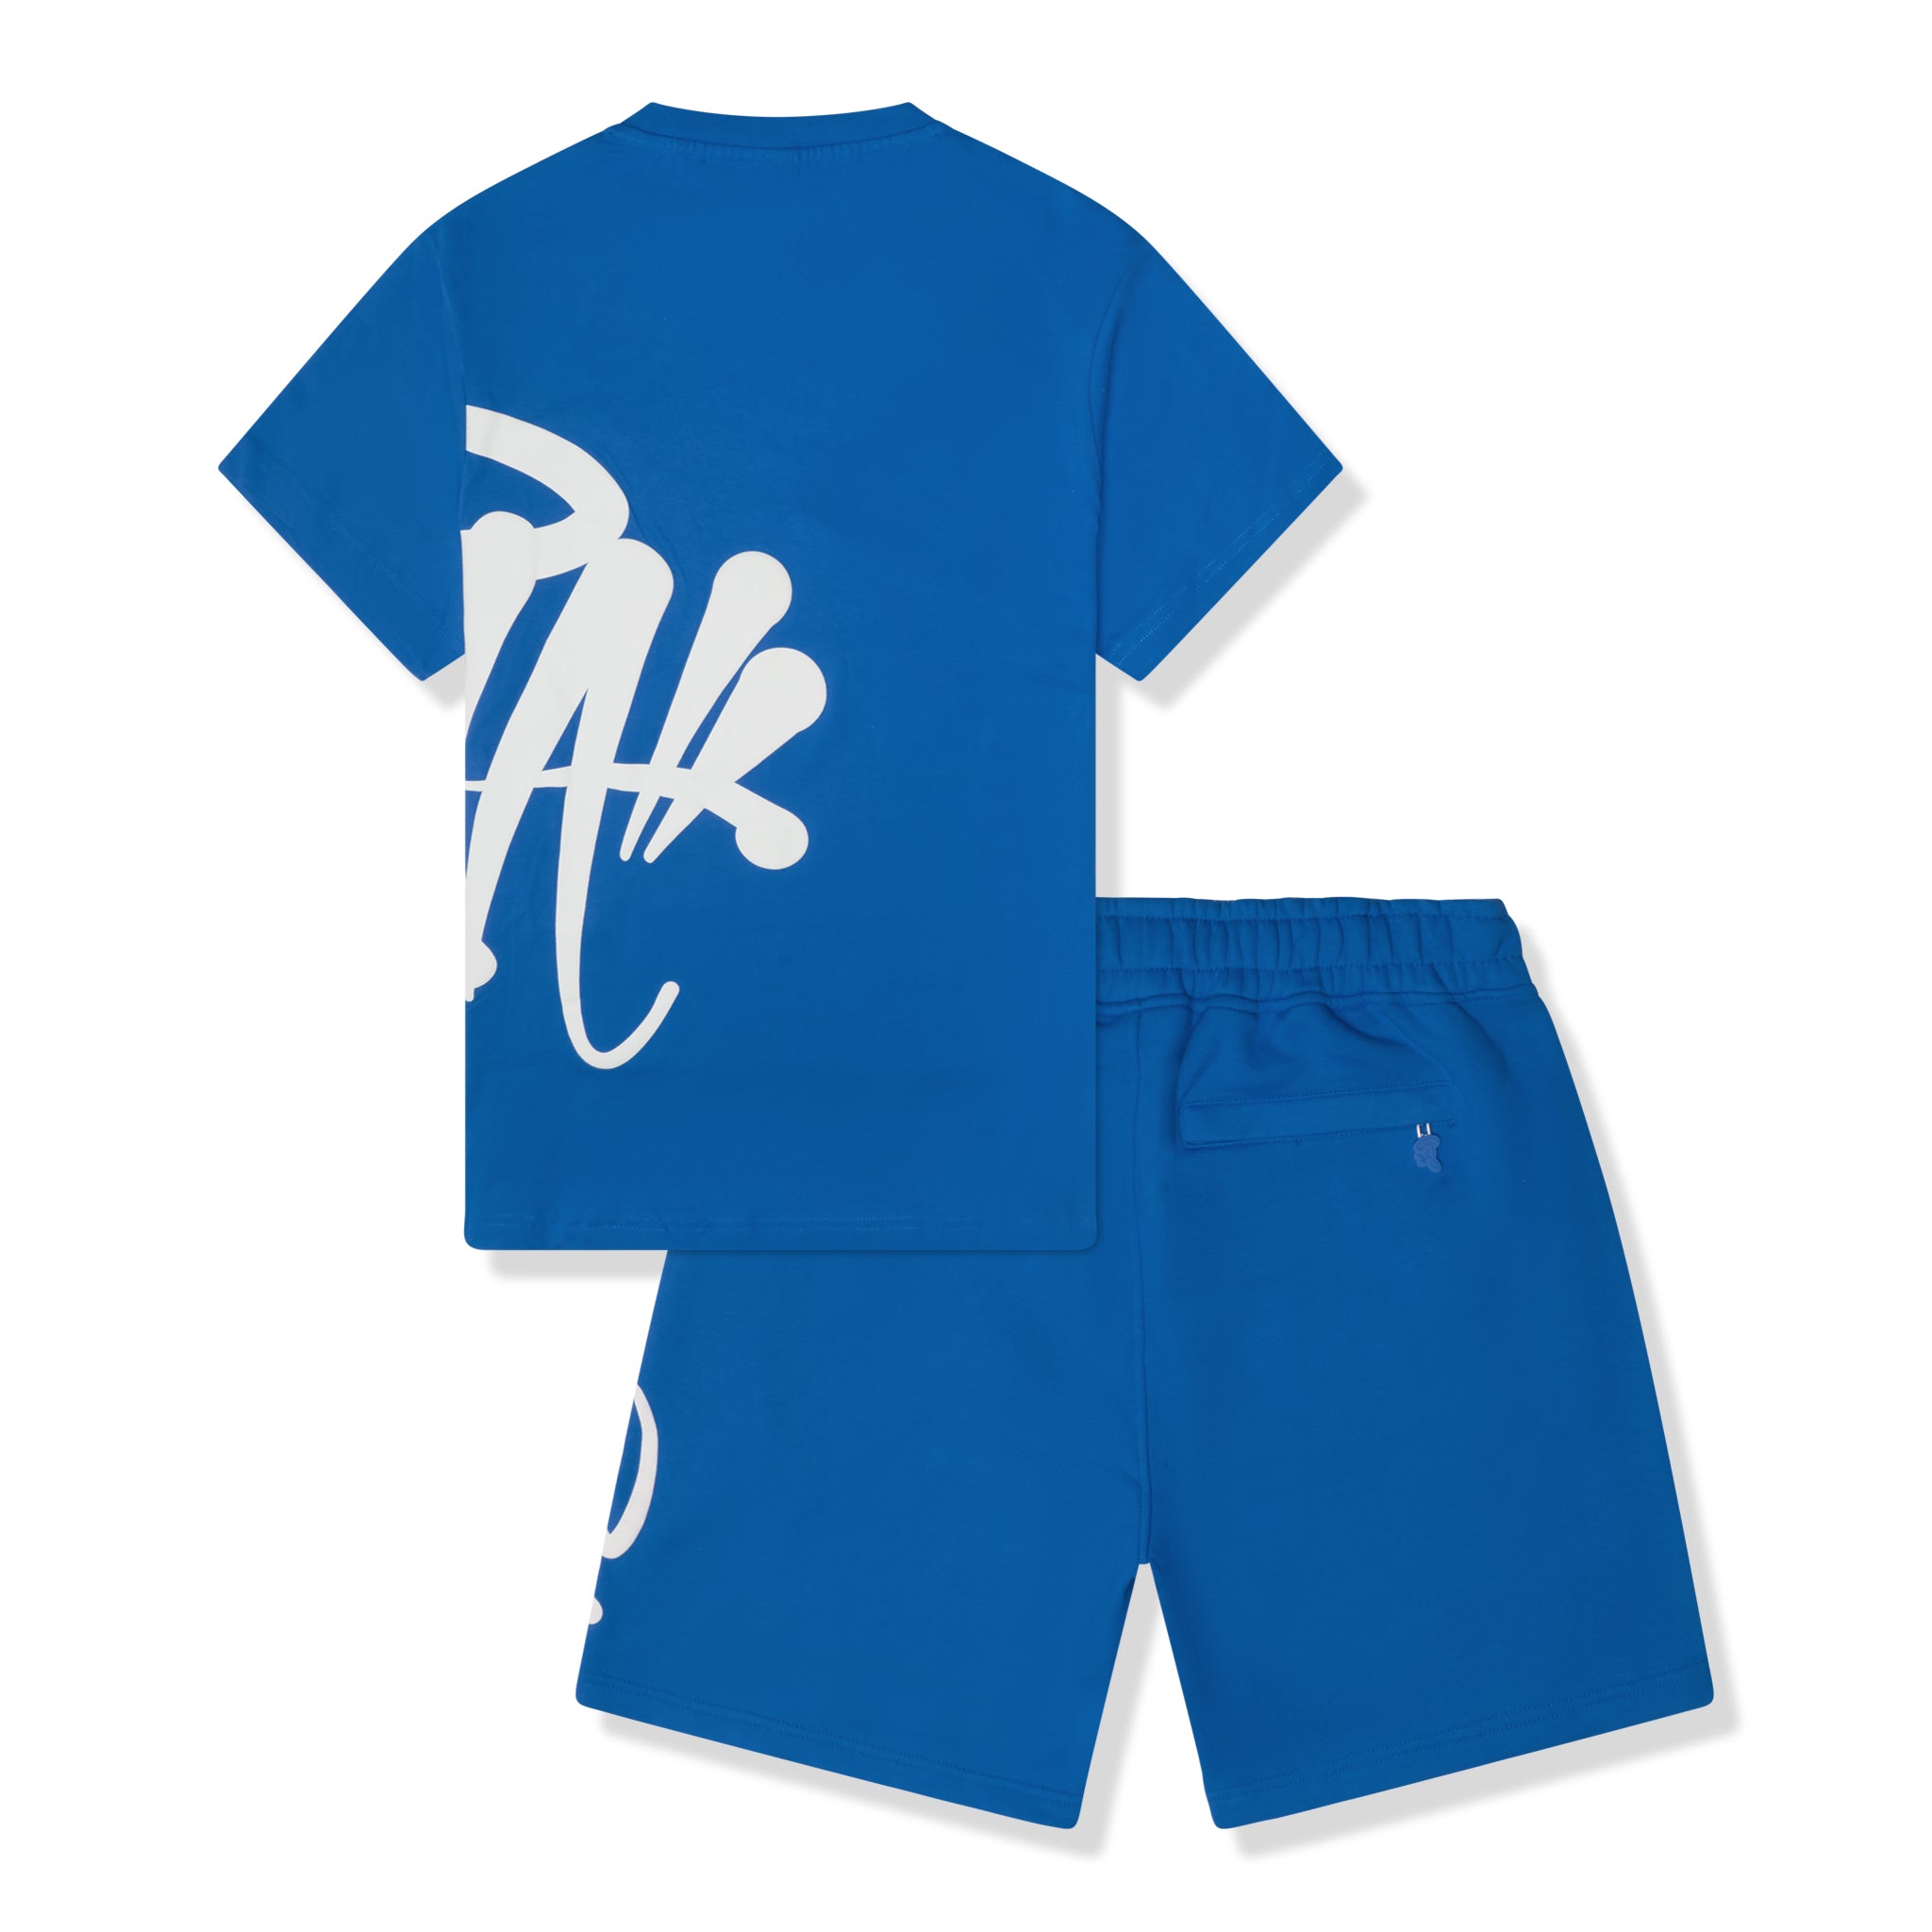 Back view of Syna World Team Syna Twinset Blue T-Shirt & Shorts TEAMSYNA-SHT-BLUE